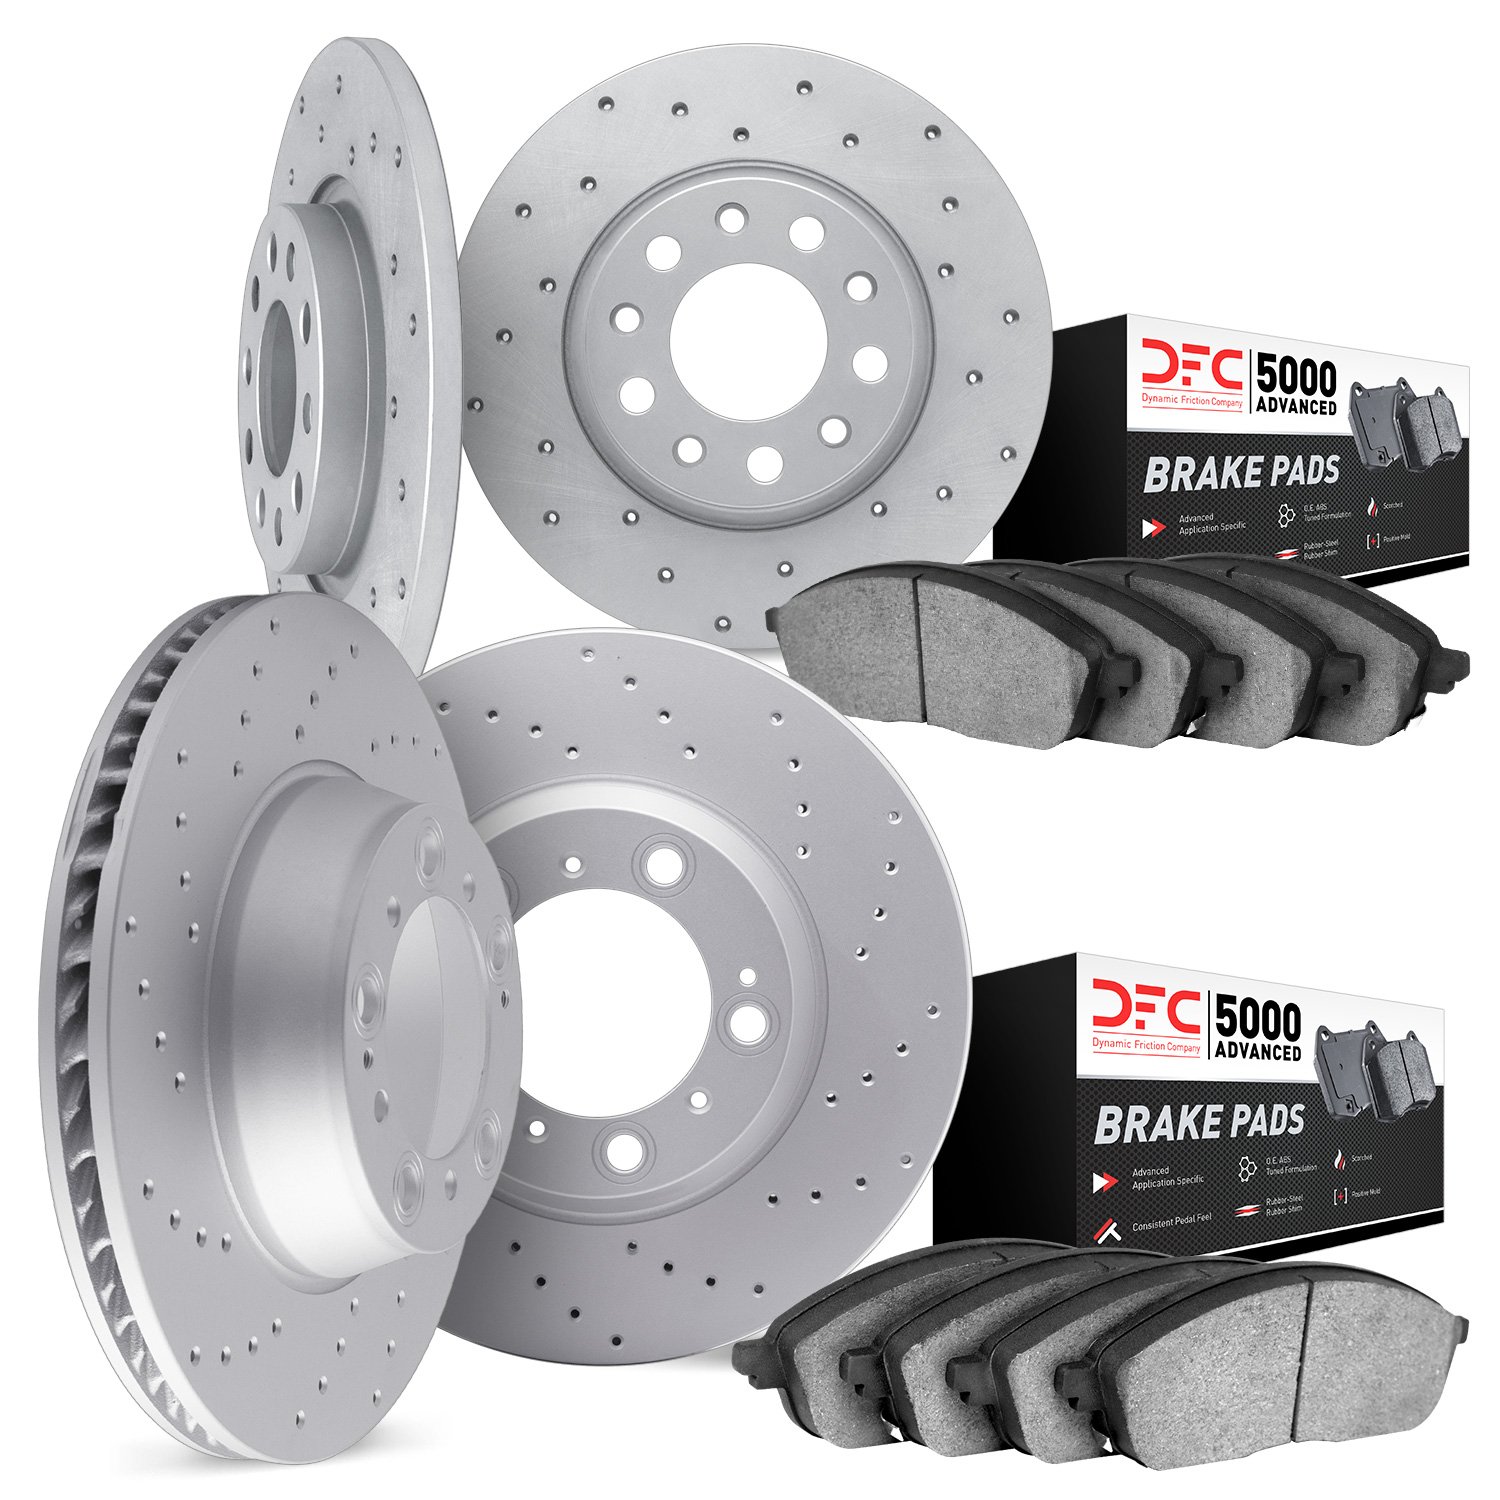 2704-31005 Geoperformance Drilled Brake Rotors with Active Performance Pads Kit, 1998-1999 BMW, Position: Front and Rear